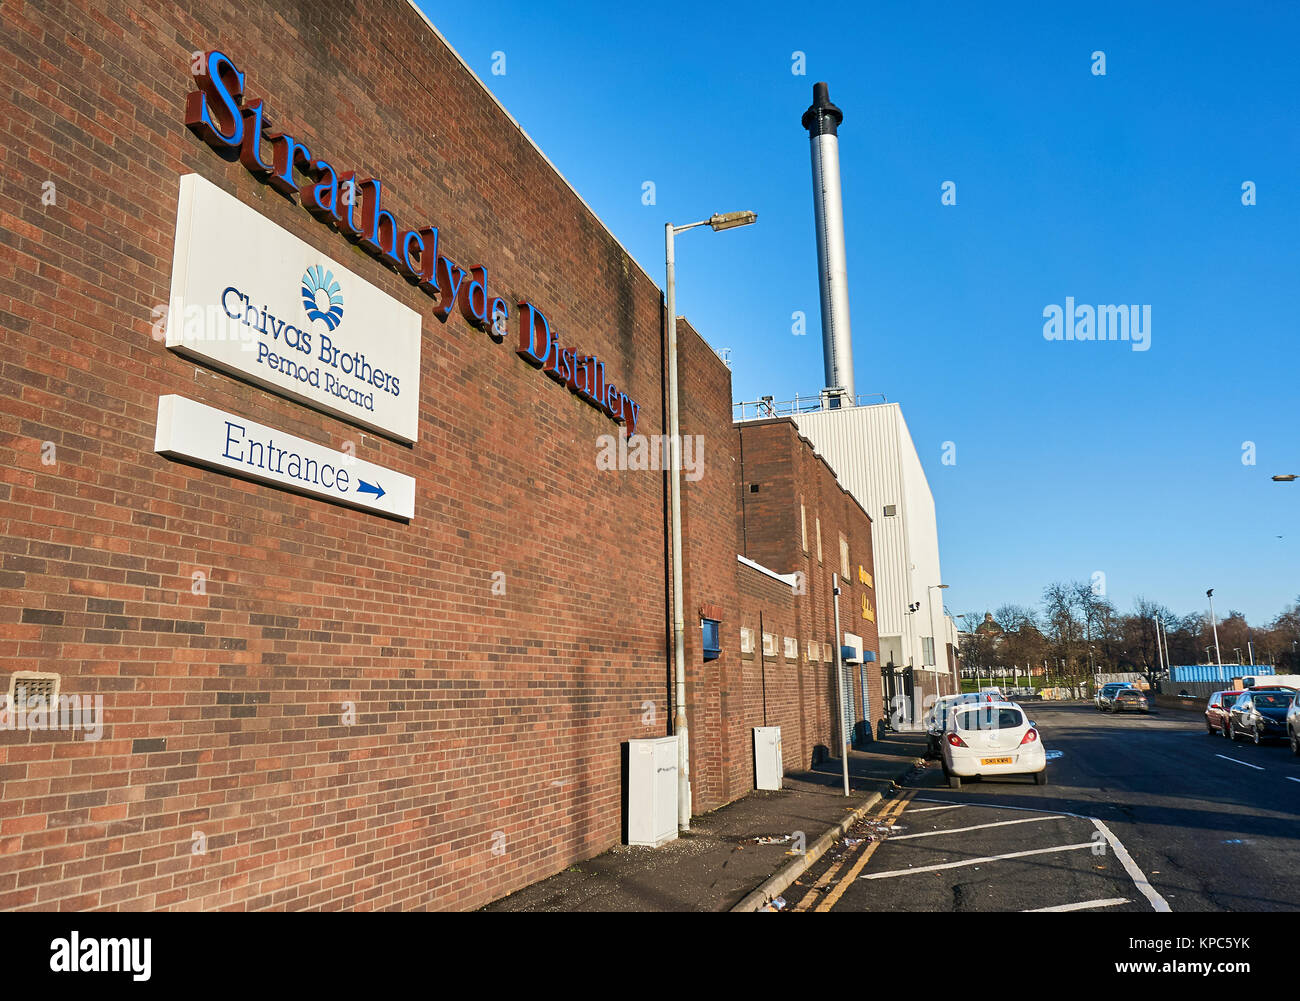 Strathclyde whiskey distillery producing Chivas Brothers and Ballantines whiskey in Glasgow, UK Stock Photo